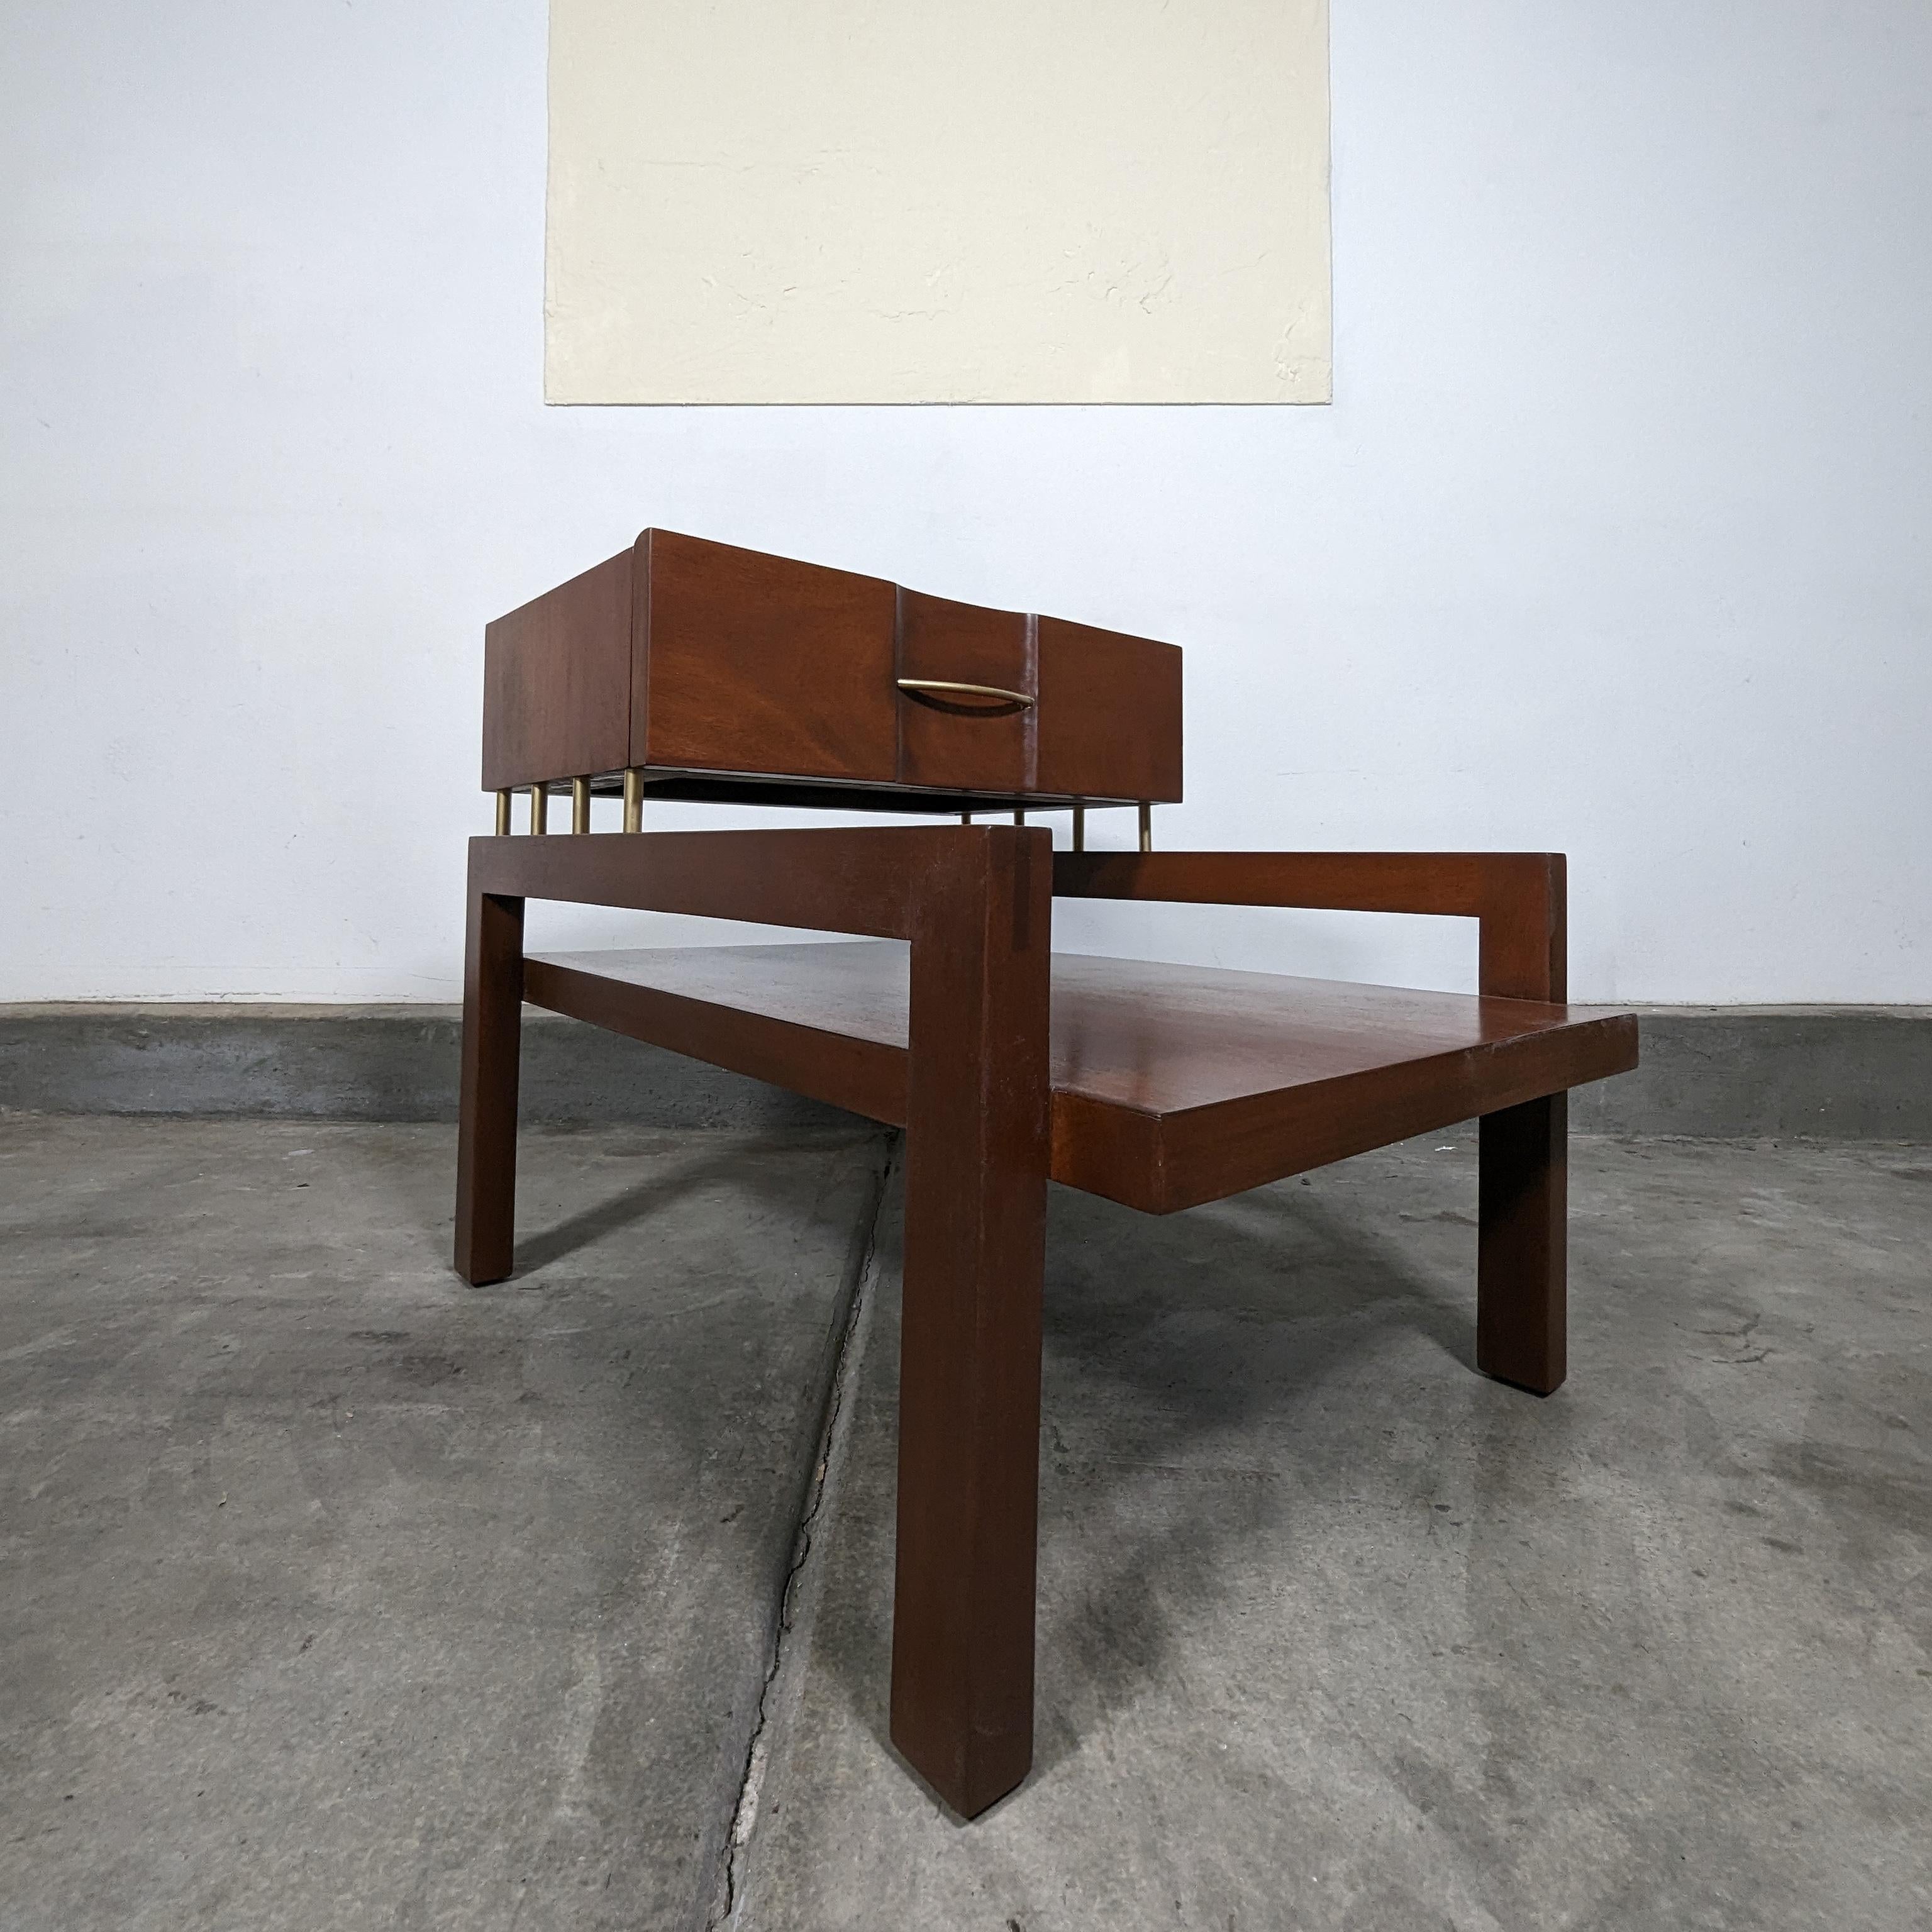 Mid Century Modern End Table by Edmond J. Spence for Industria Mueblera, c1950s For Sale 7